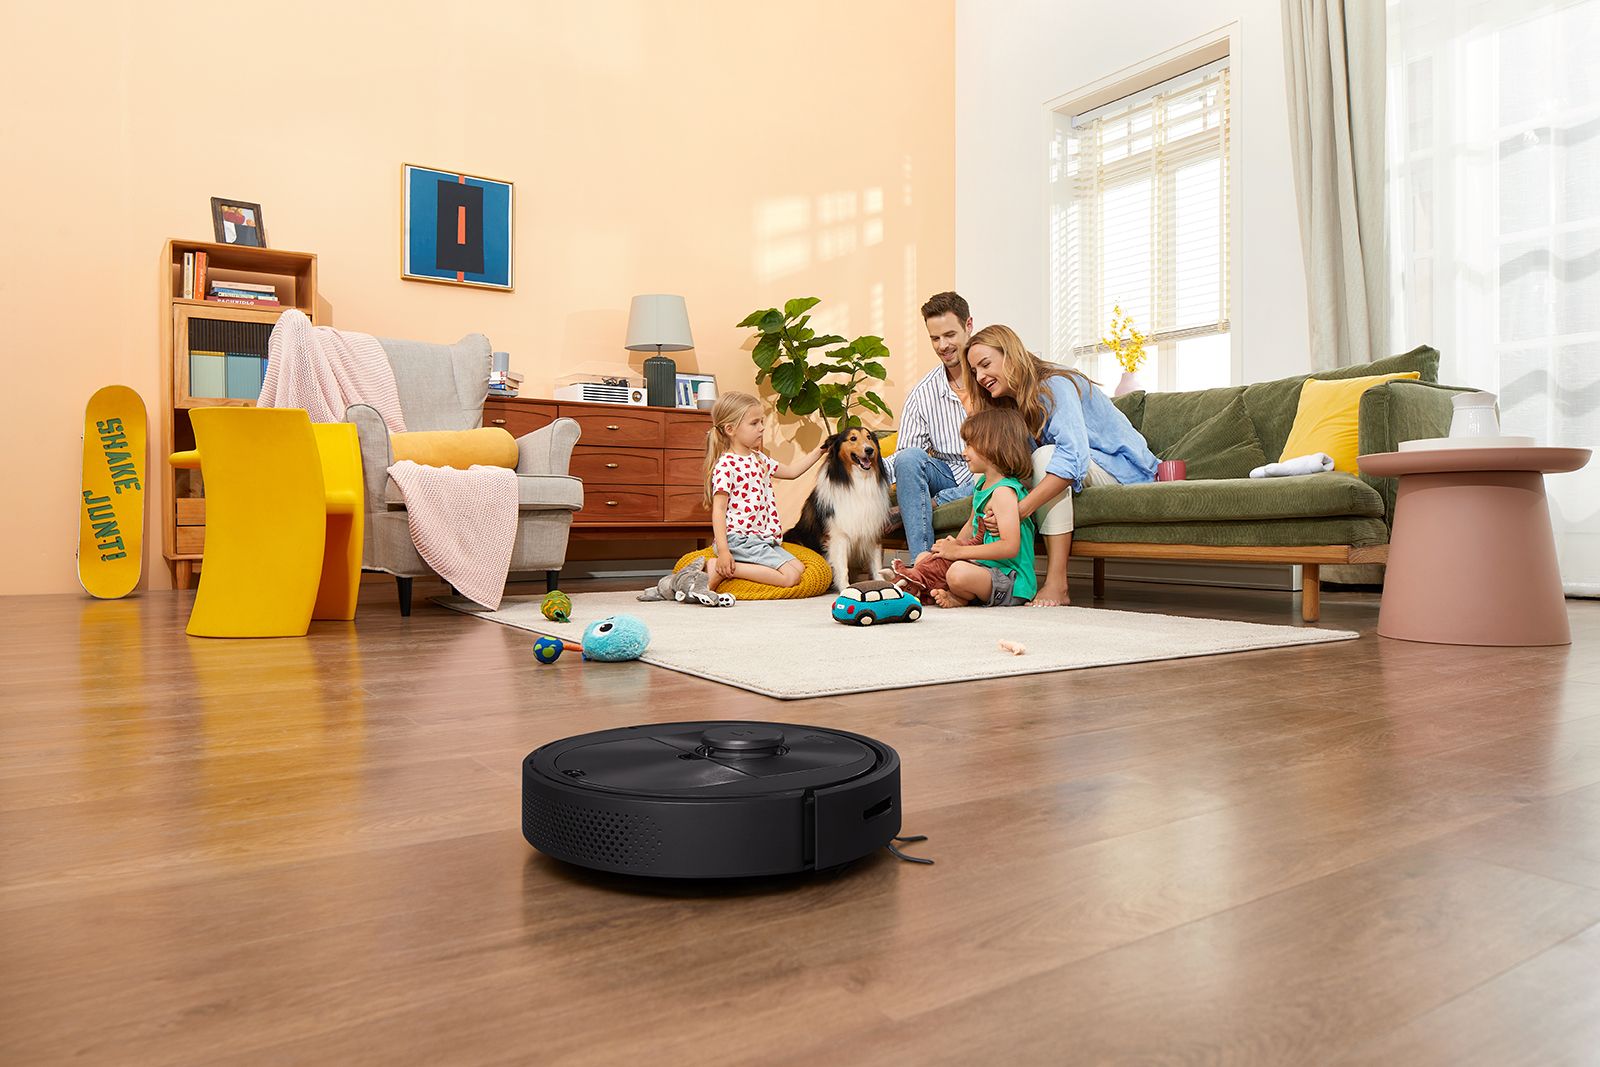 The Roborock Q5 vacuum cleans while the family plays